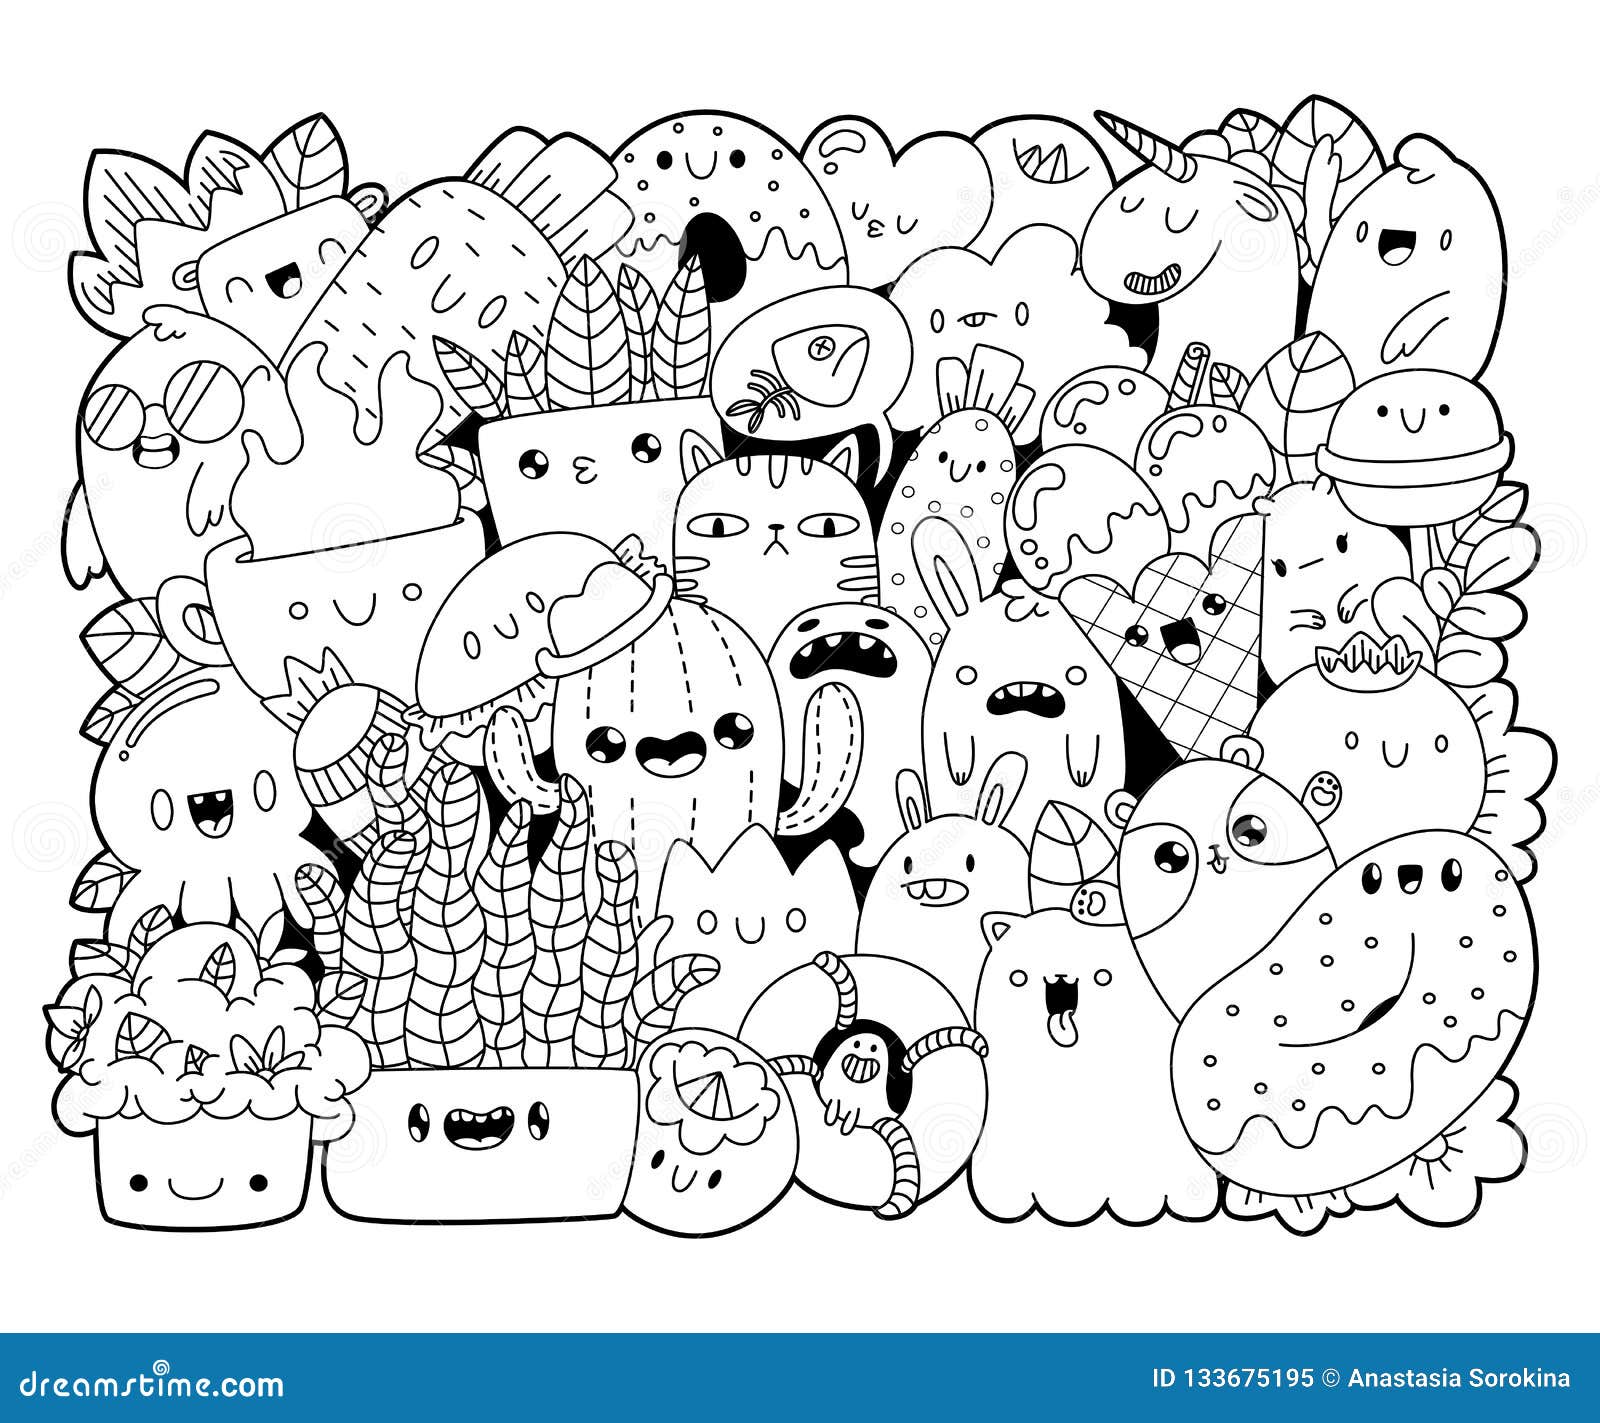 cute cartoon food coloring pages